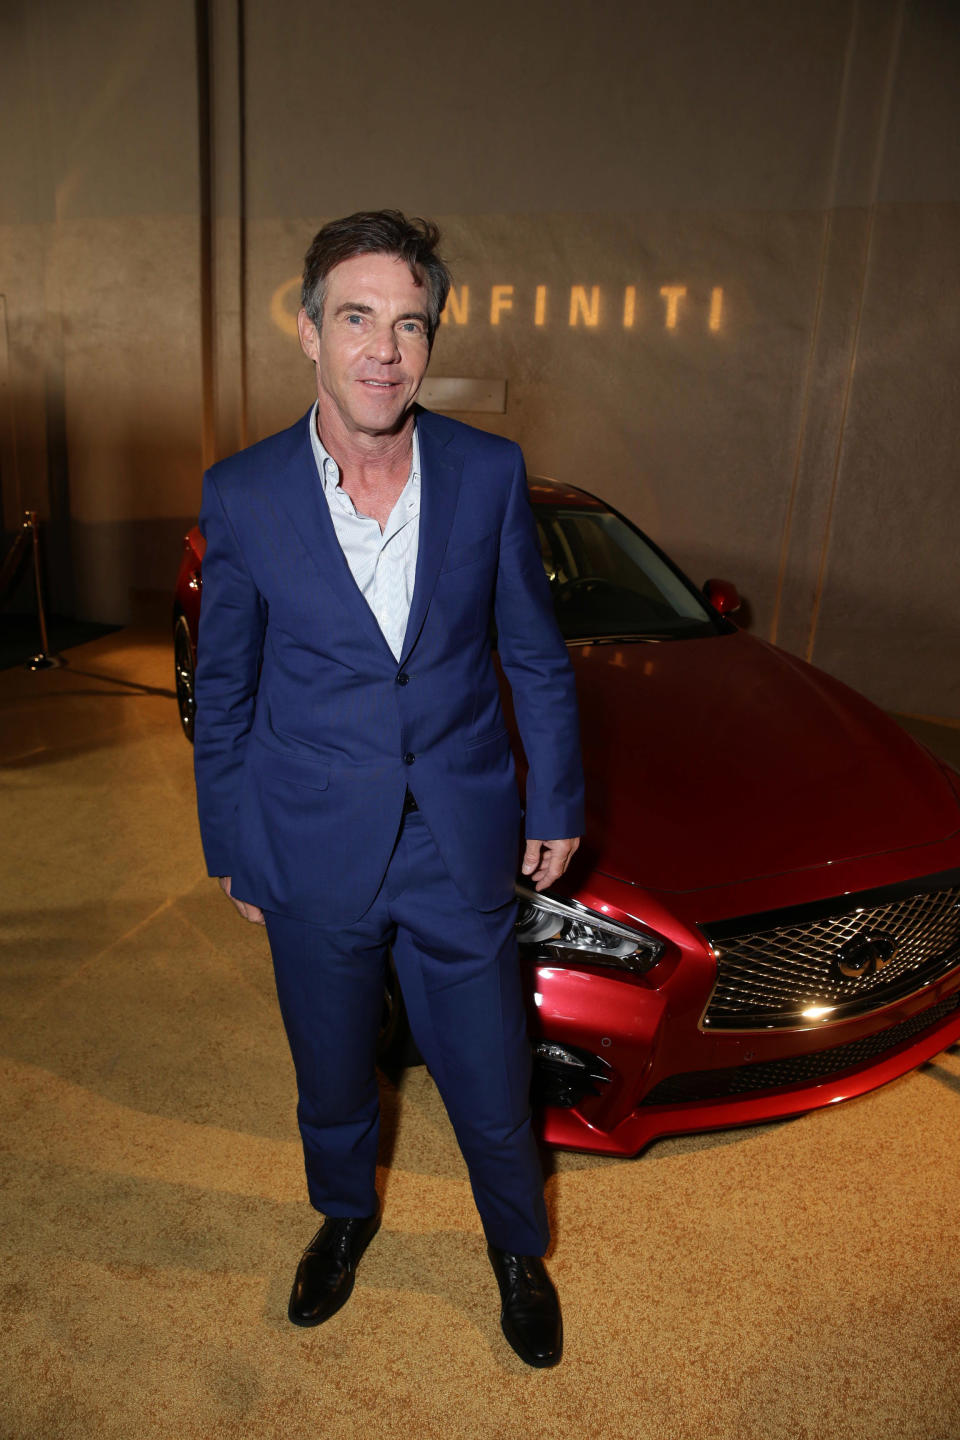 Dennis Quaid seen at Los Angeles Premiere for Crackle's 'The Art of More' at Sony Pictures on Thursday, October 29, 2015, in Los Angeles, CA. (Photo by Eric Charbonneau/Invision for Crackle/AP Images)